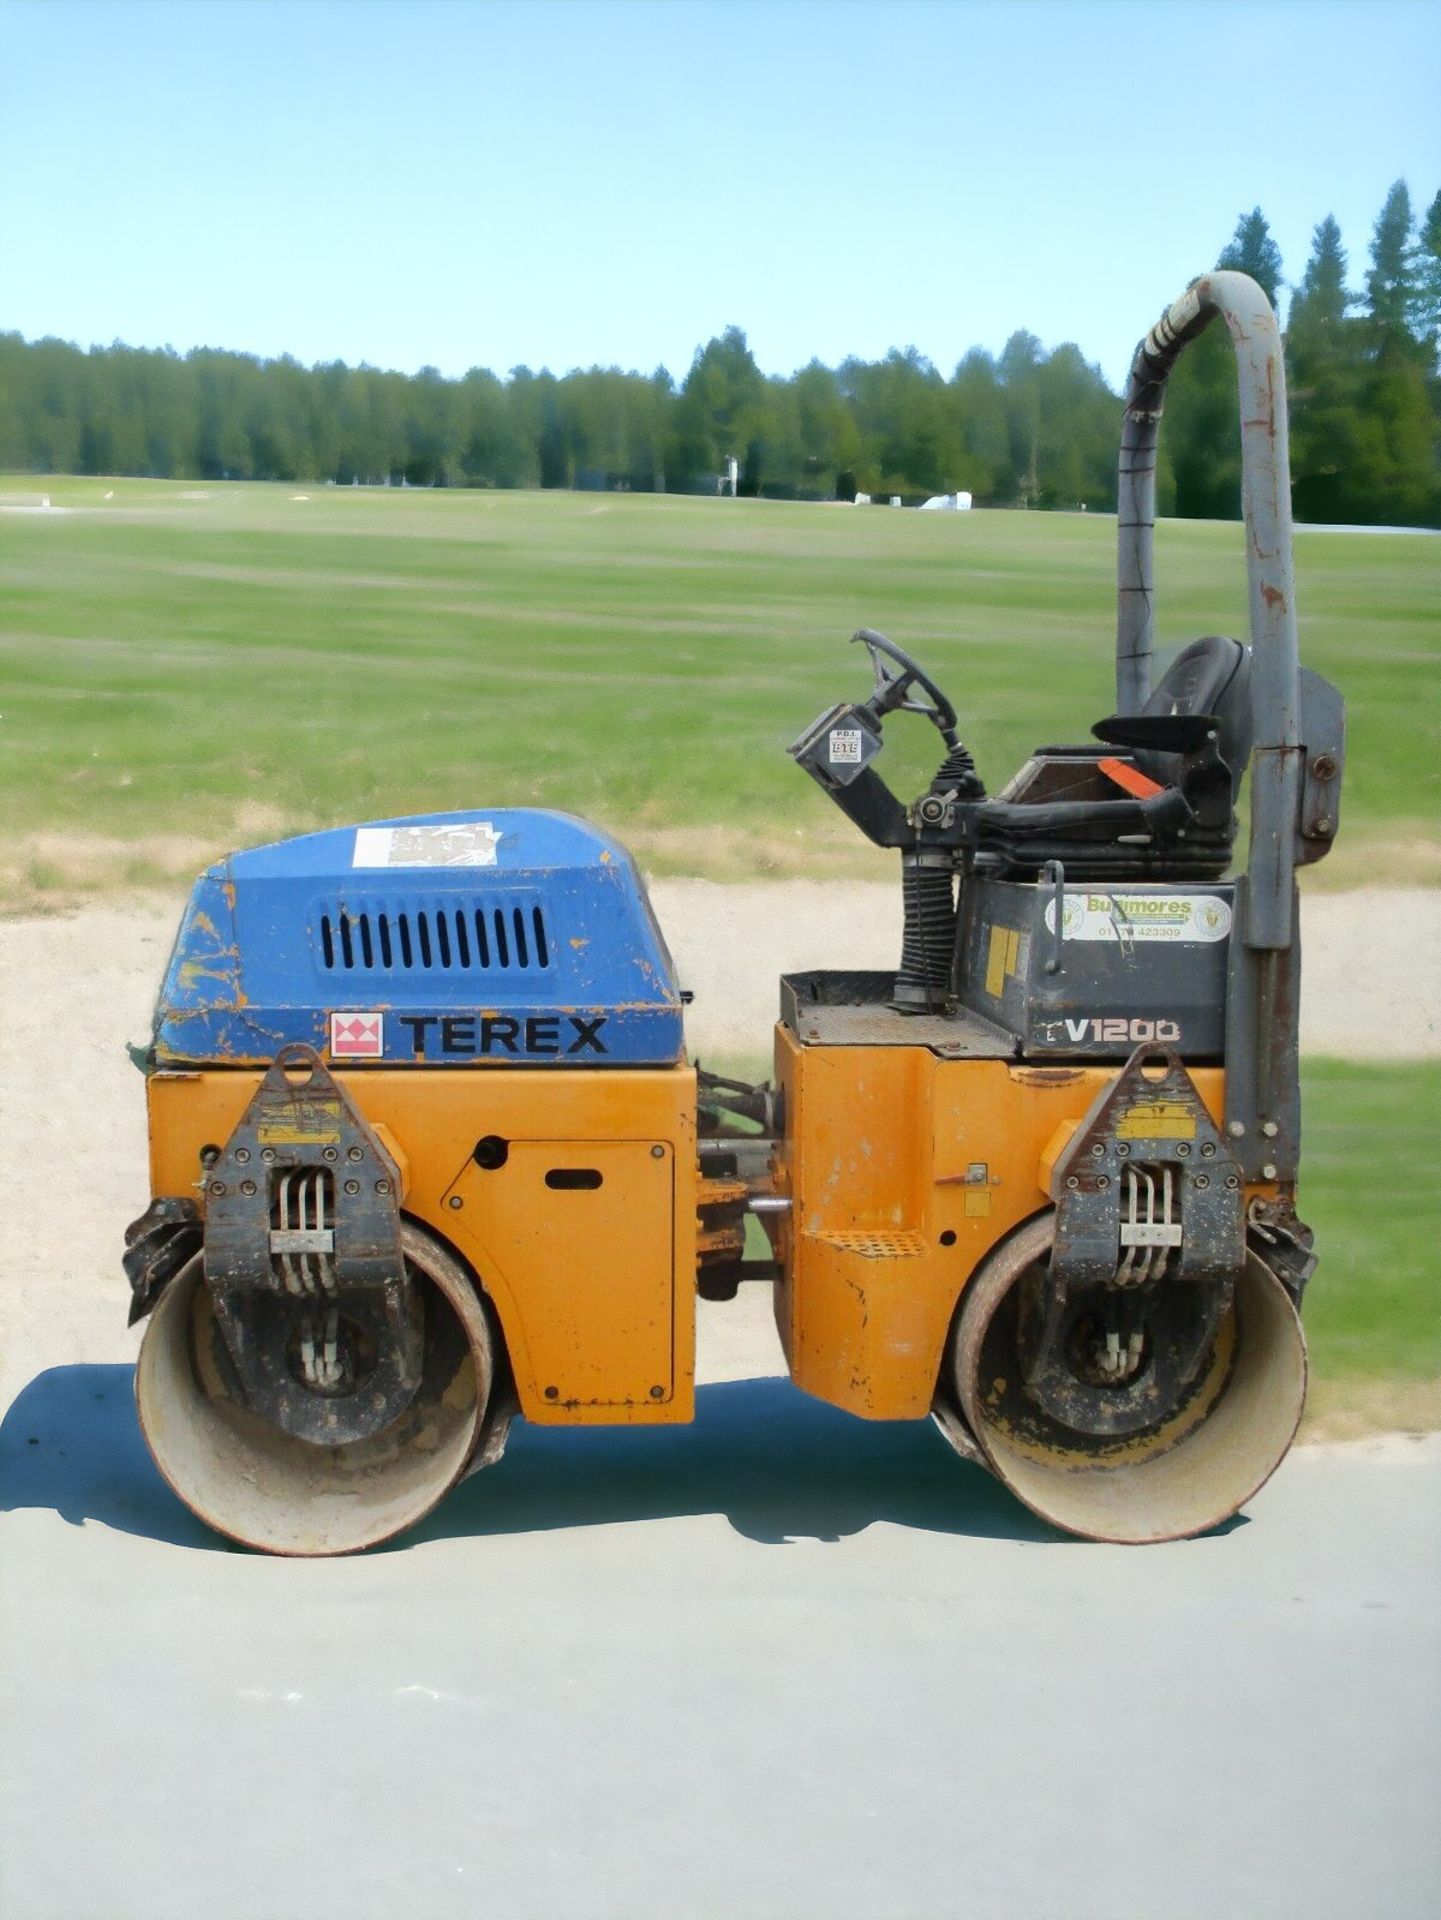 ACHIEVE SMOOTH AND UNIFORM COMPACTION WITH THE TEREX TV1200 ROLLER